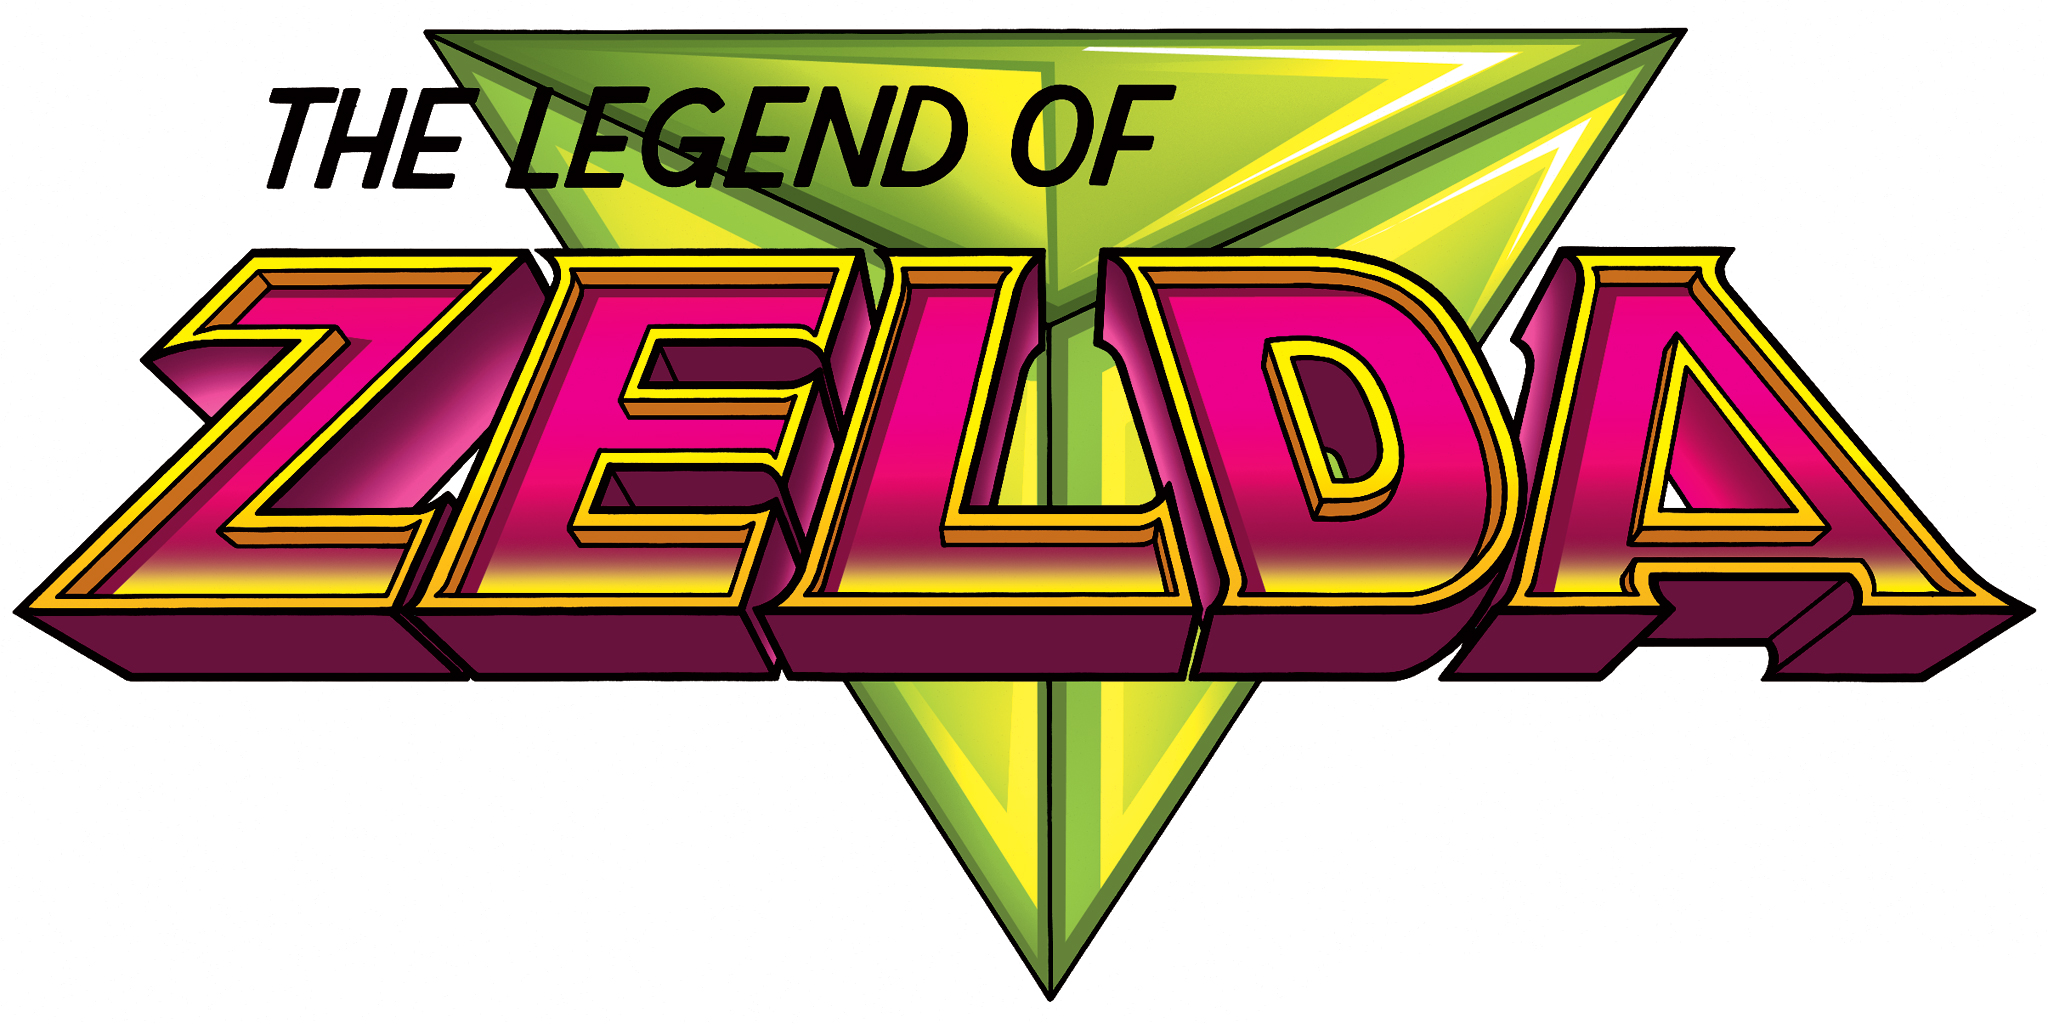 The Legend of Zelda [Animated TV Series] (1989) - | Synopsis ...